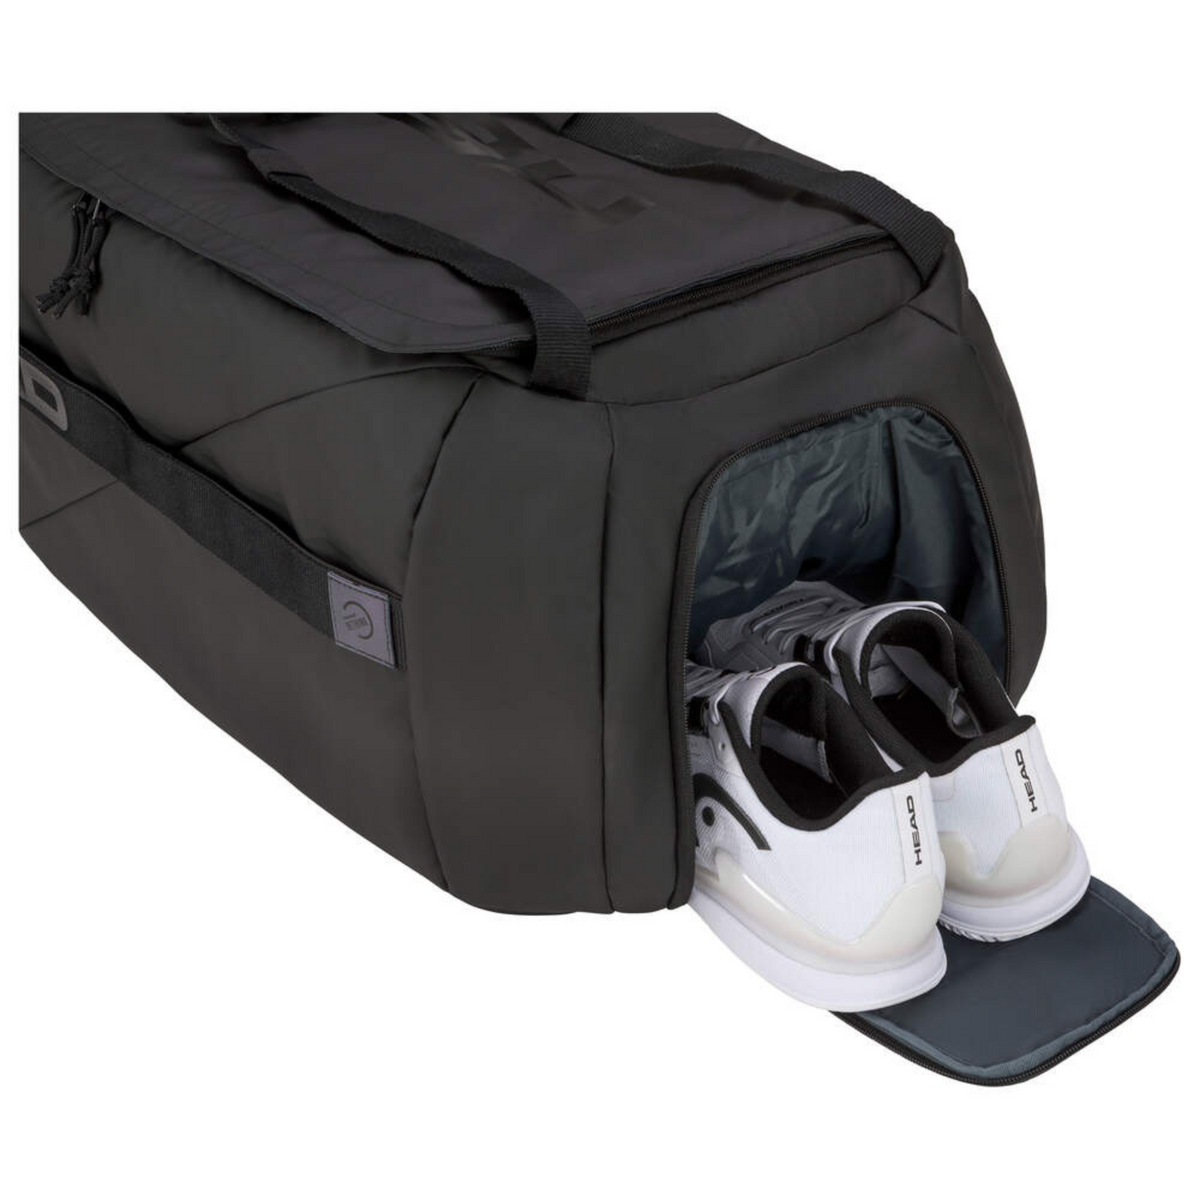 Head Black tennis Bag That Holds Shoes, Rackets, balls and accessories